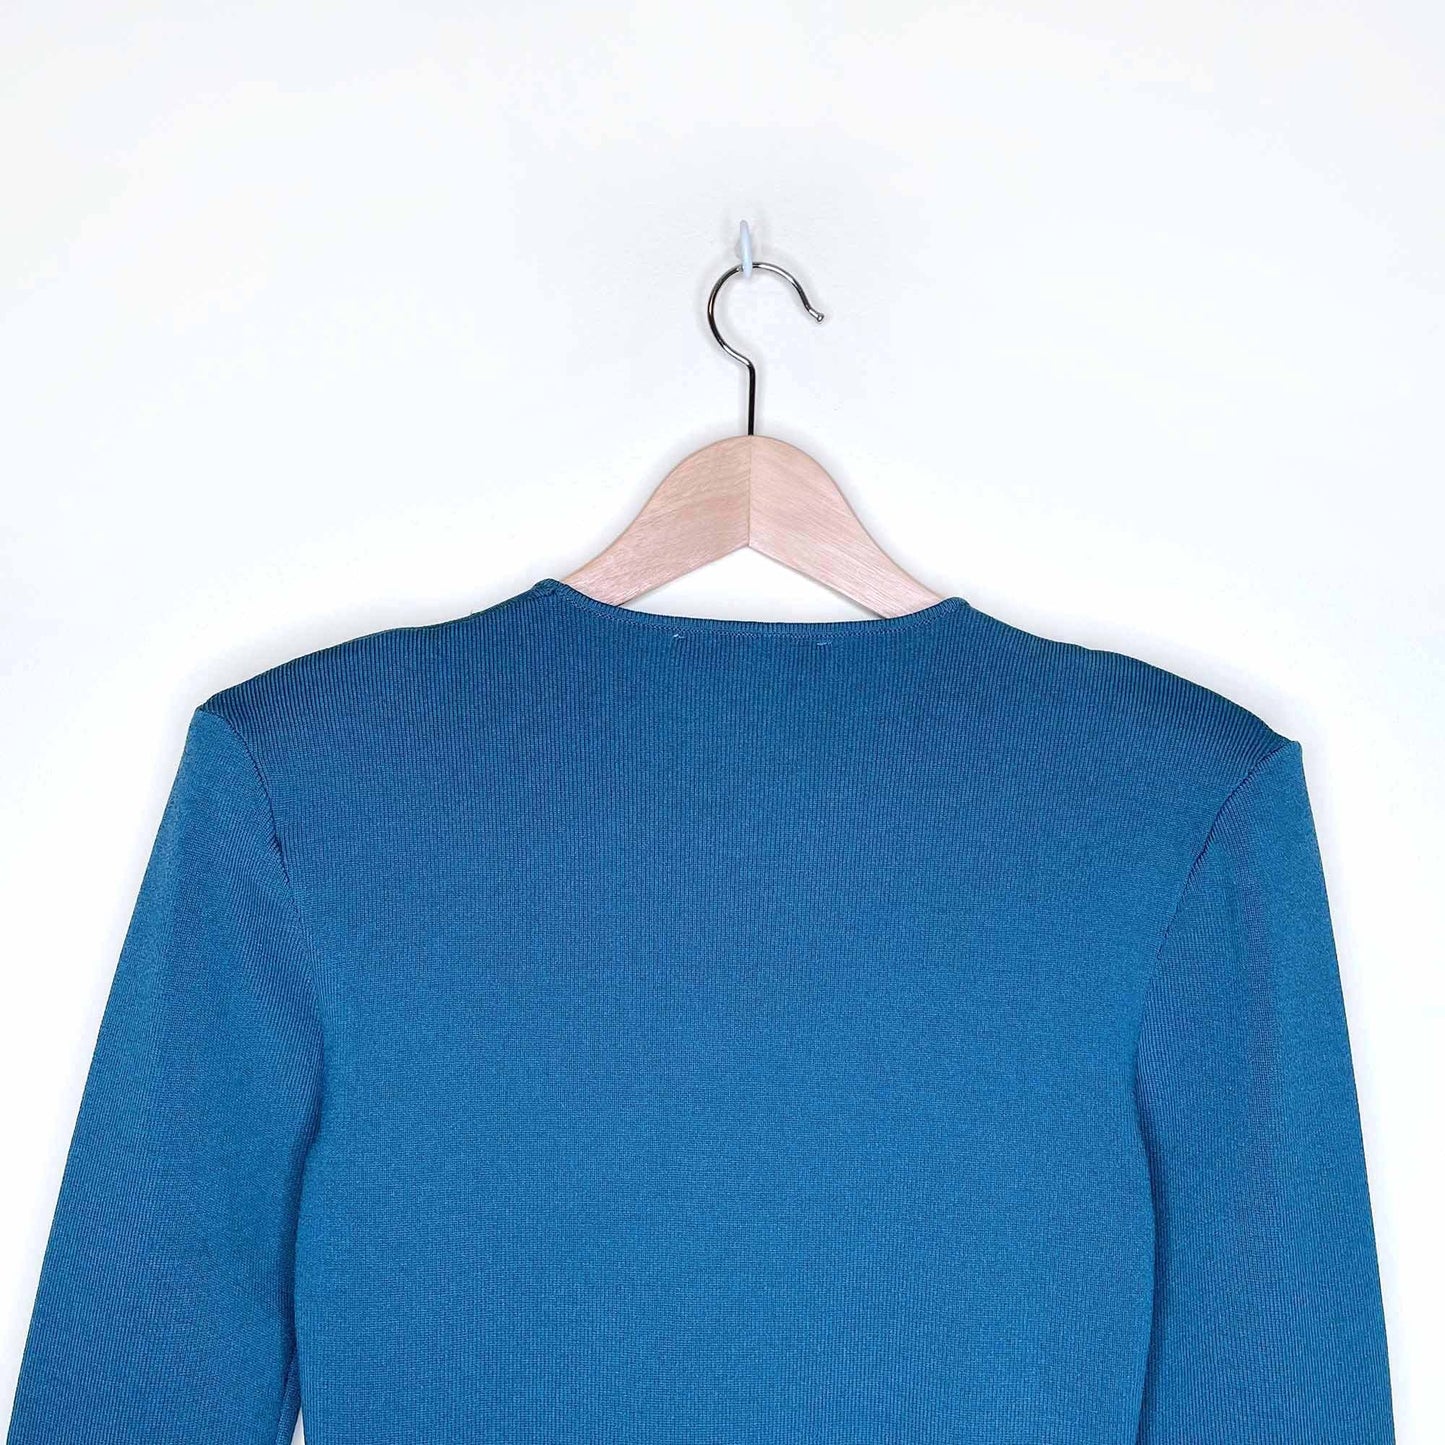 zara ribbed knit top with shoulder pads - size medium